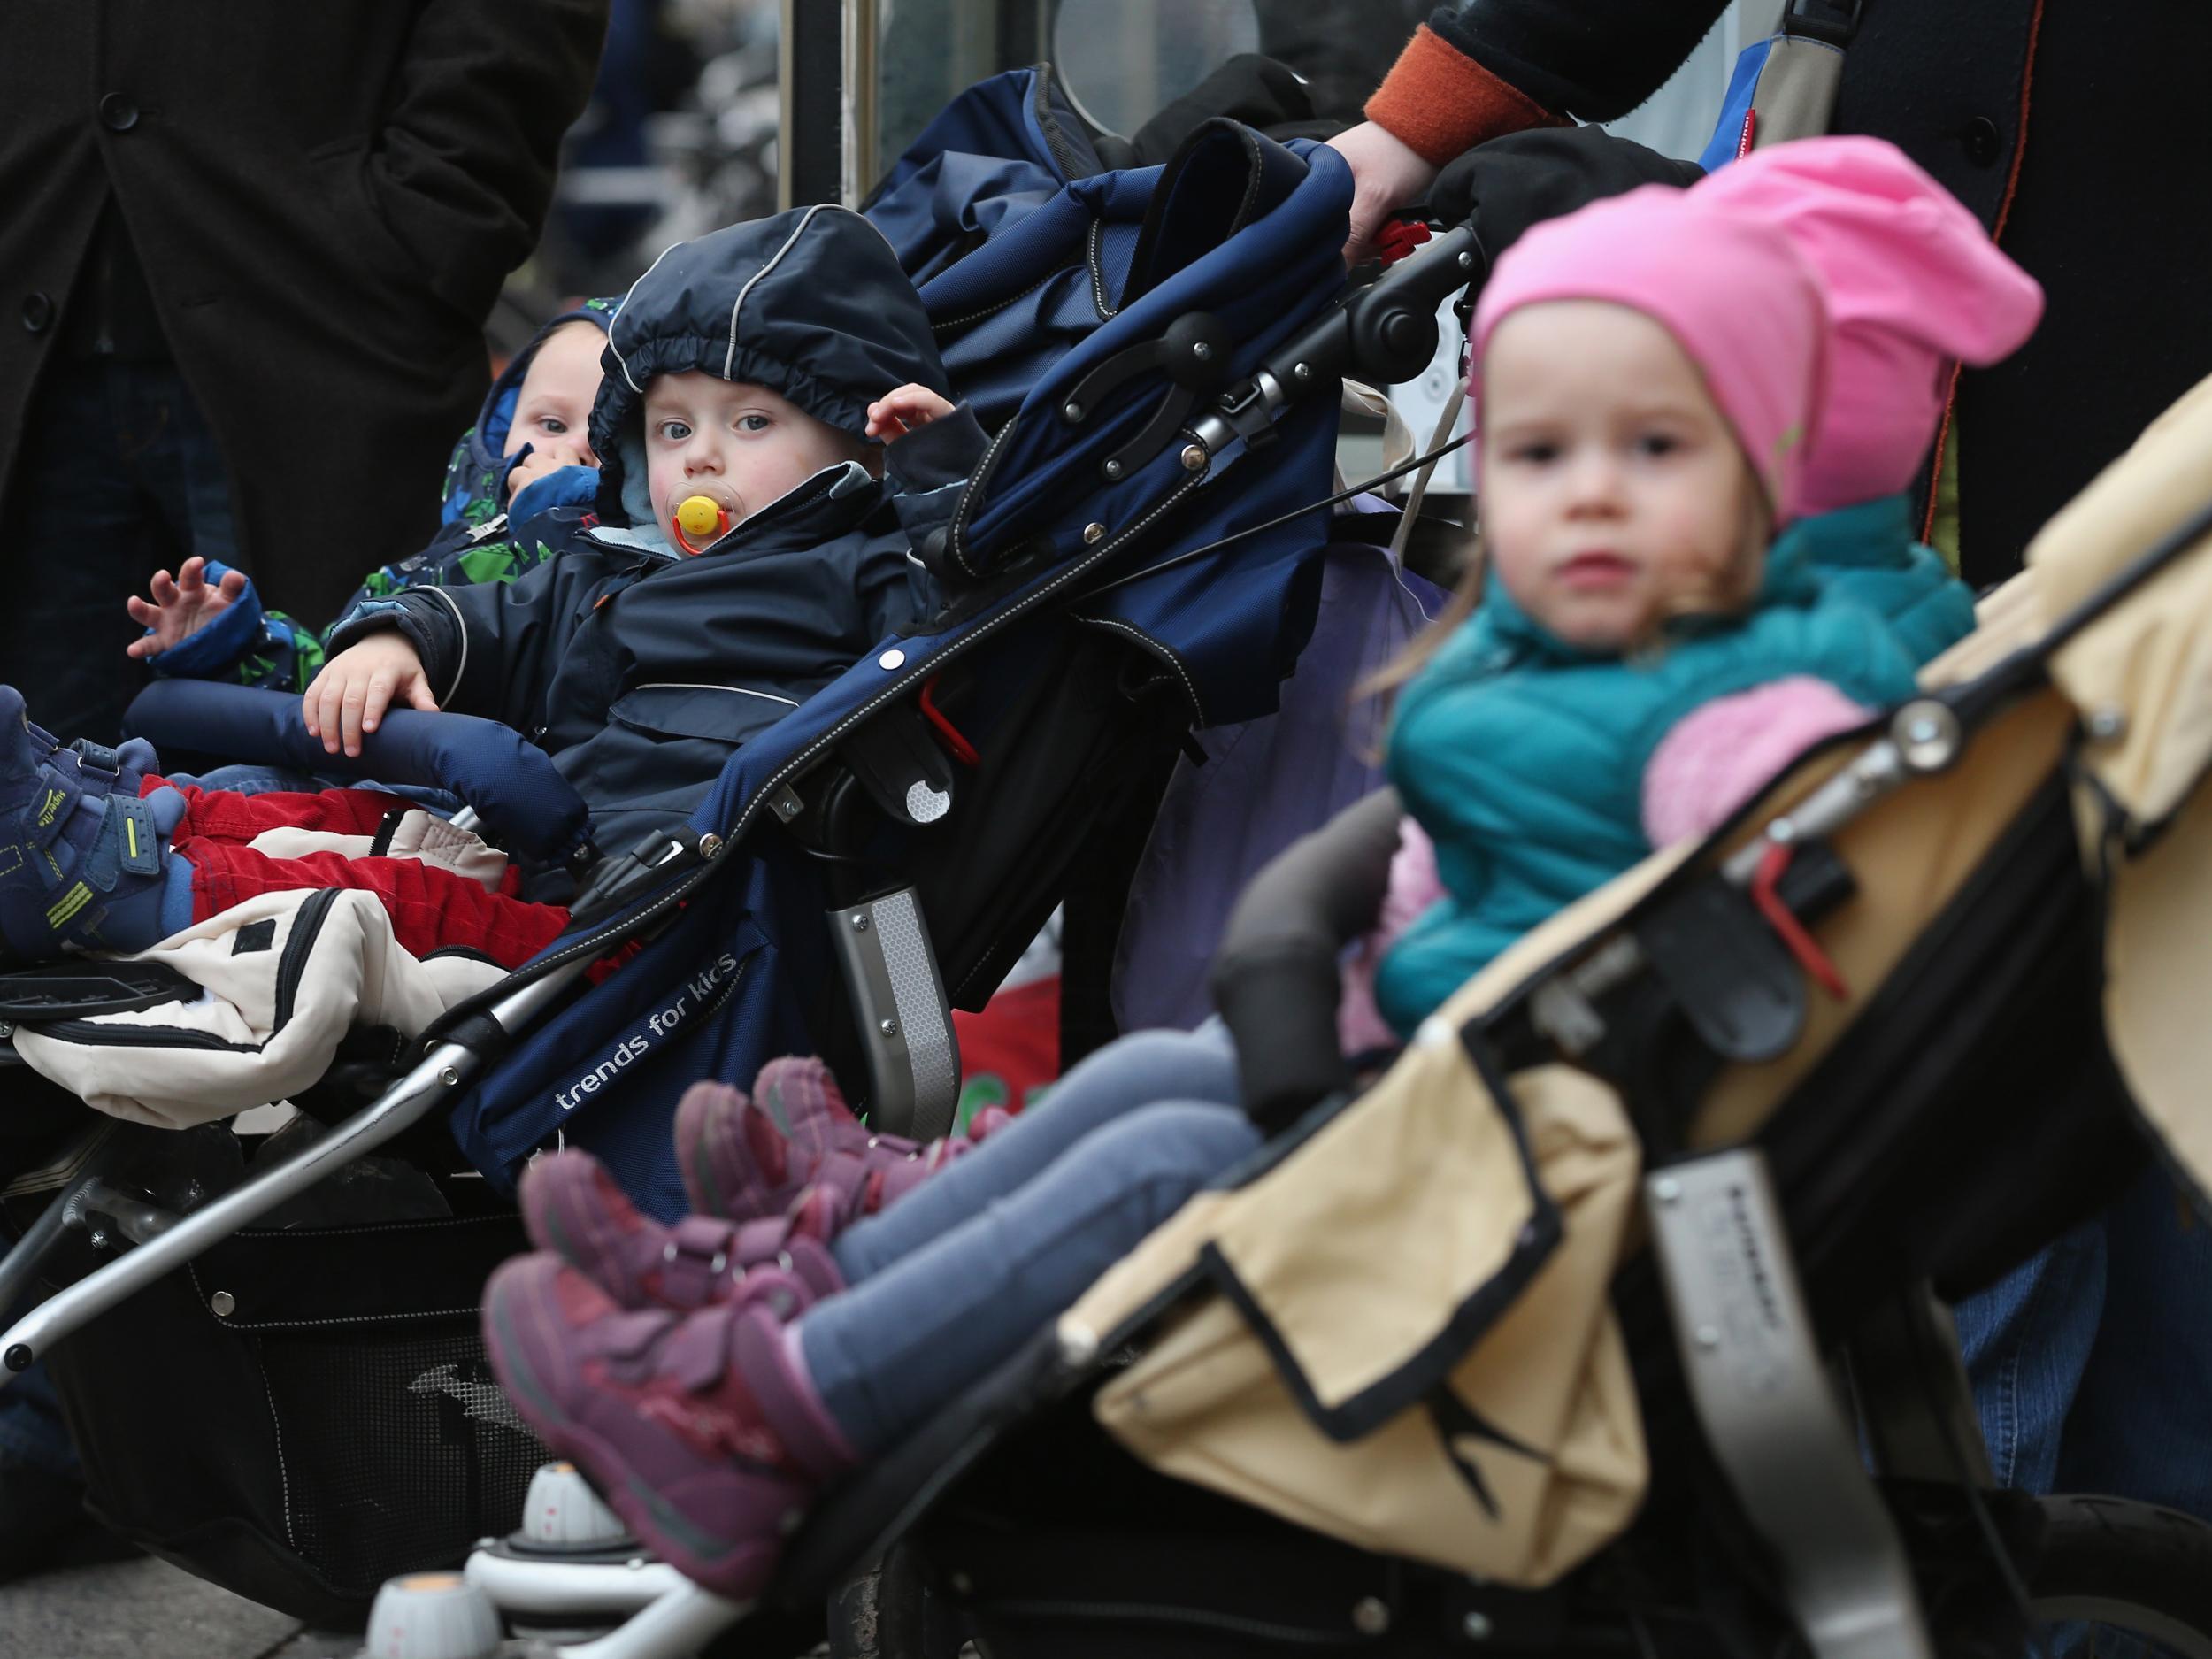 The German government has attempted to bolster the birthrate